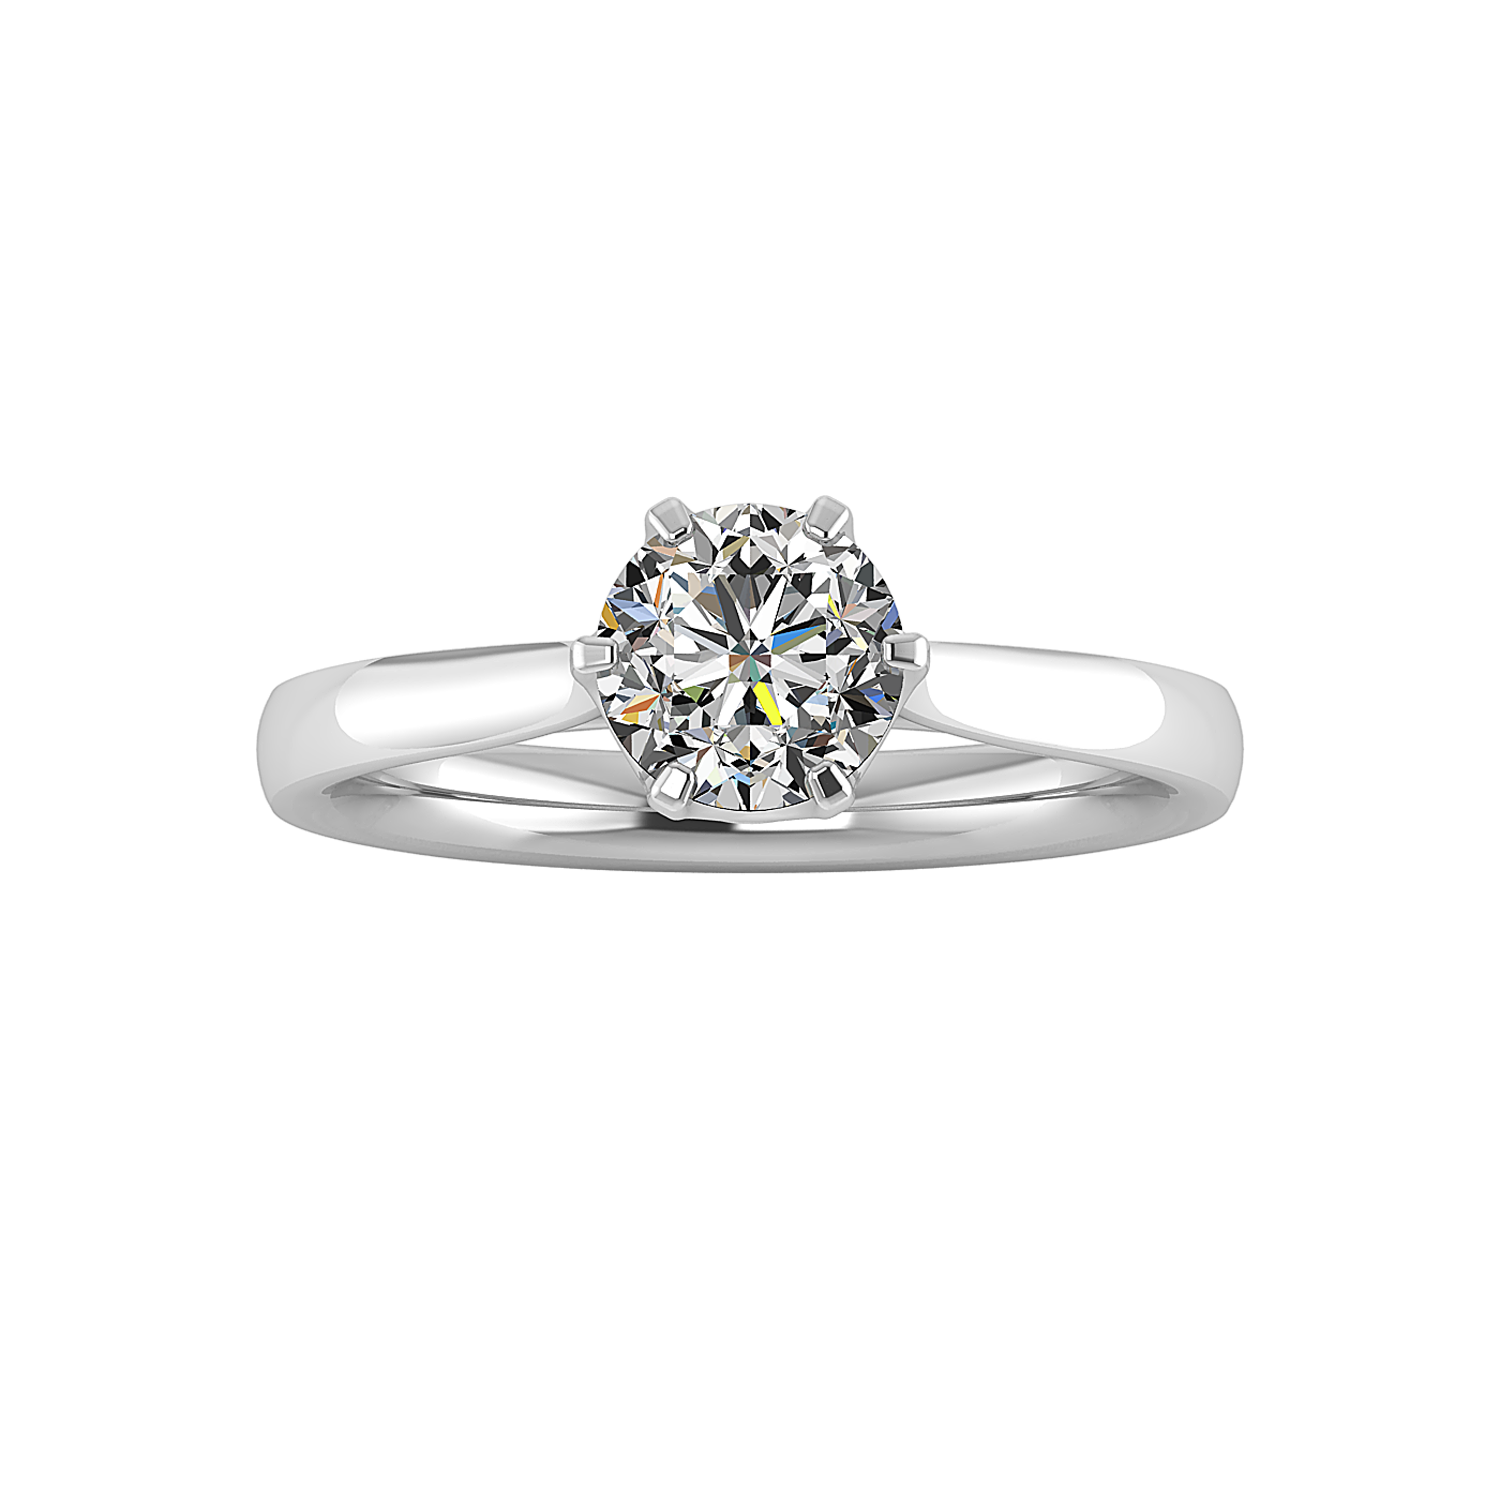 Isabelle Royal Solitaire Engagement Ring